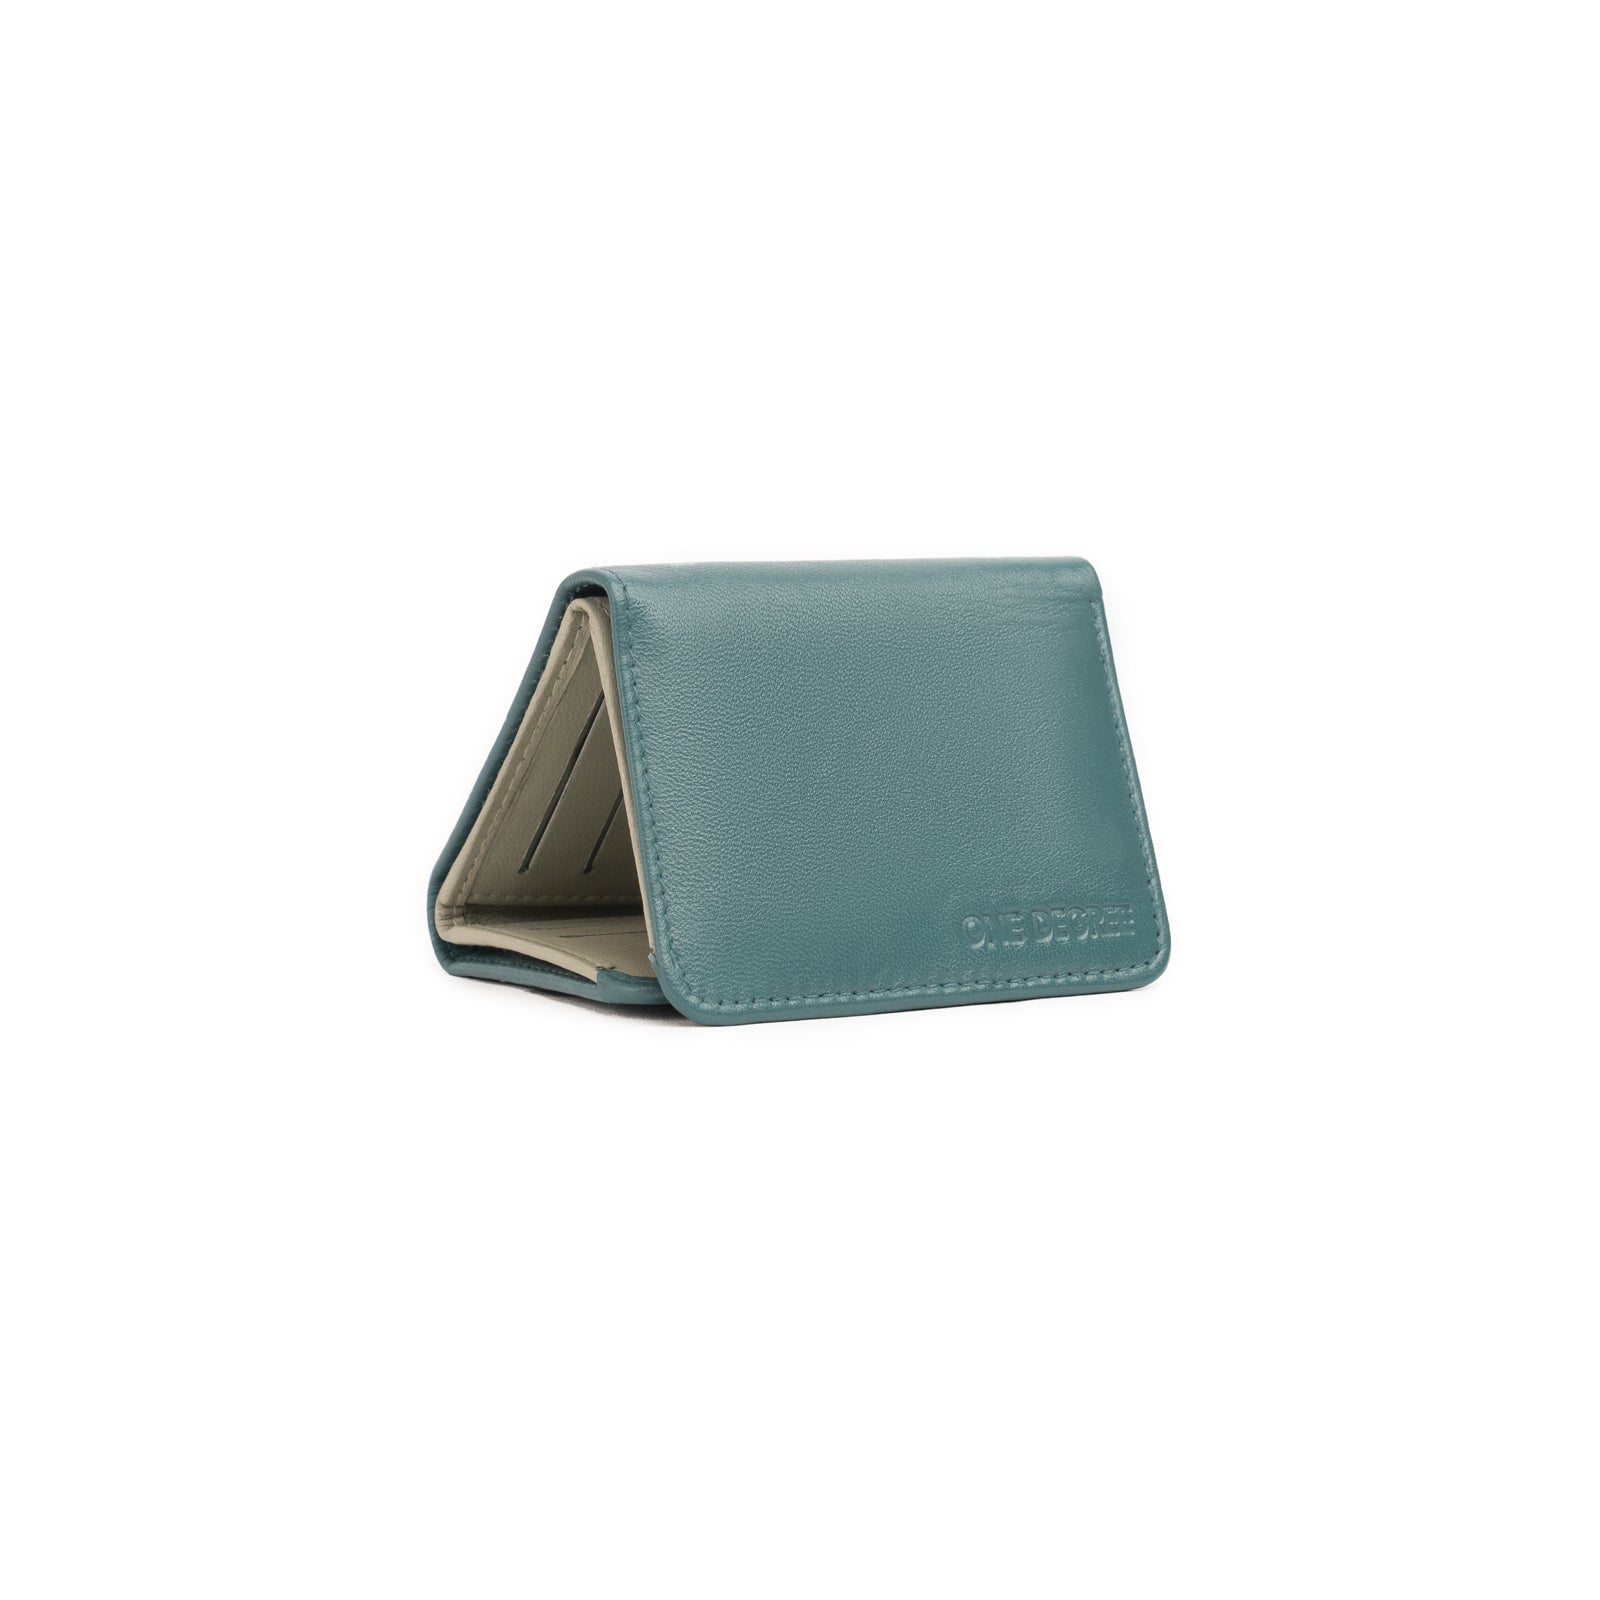 Teal and Light Green Tri Fold Women's Leather Wallet-1